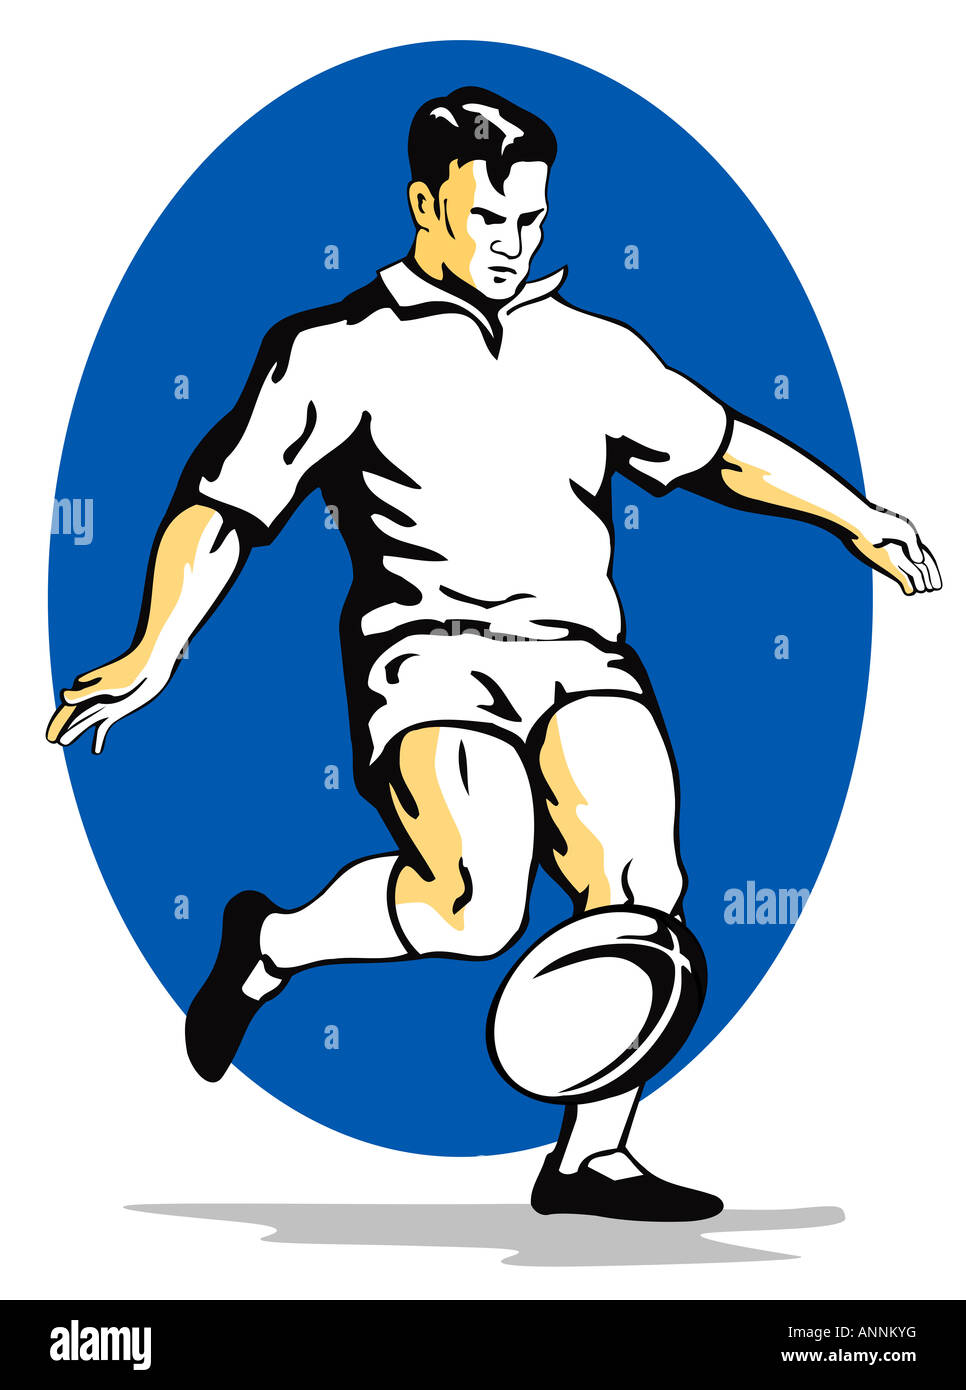 Rugby player kicking the ball Stock Photo